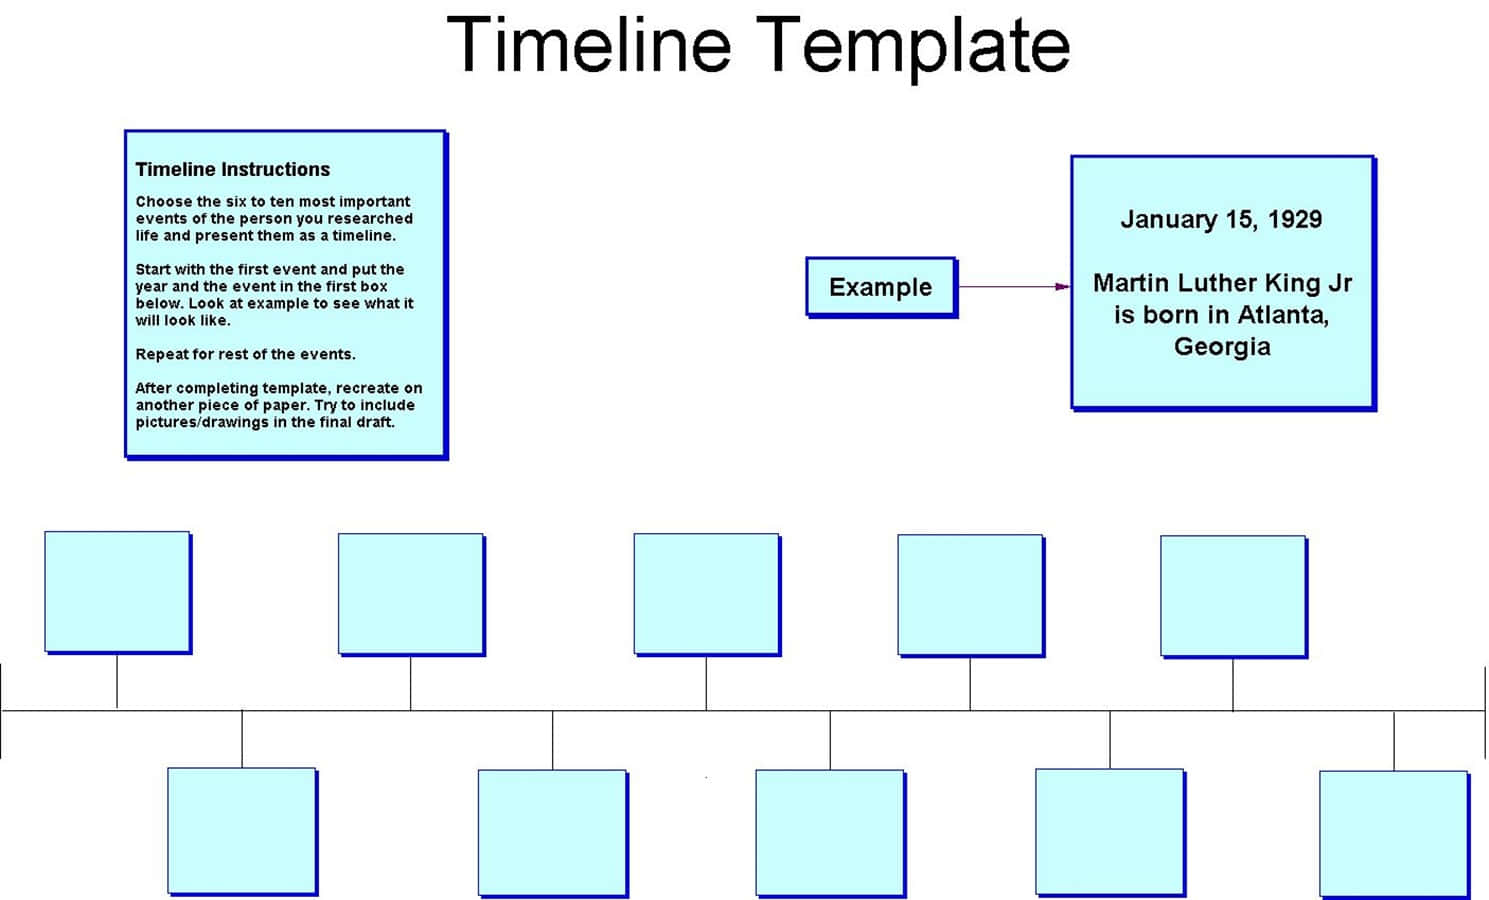 Timeline Template For A Project